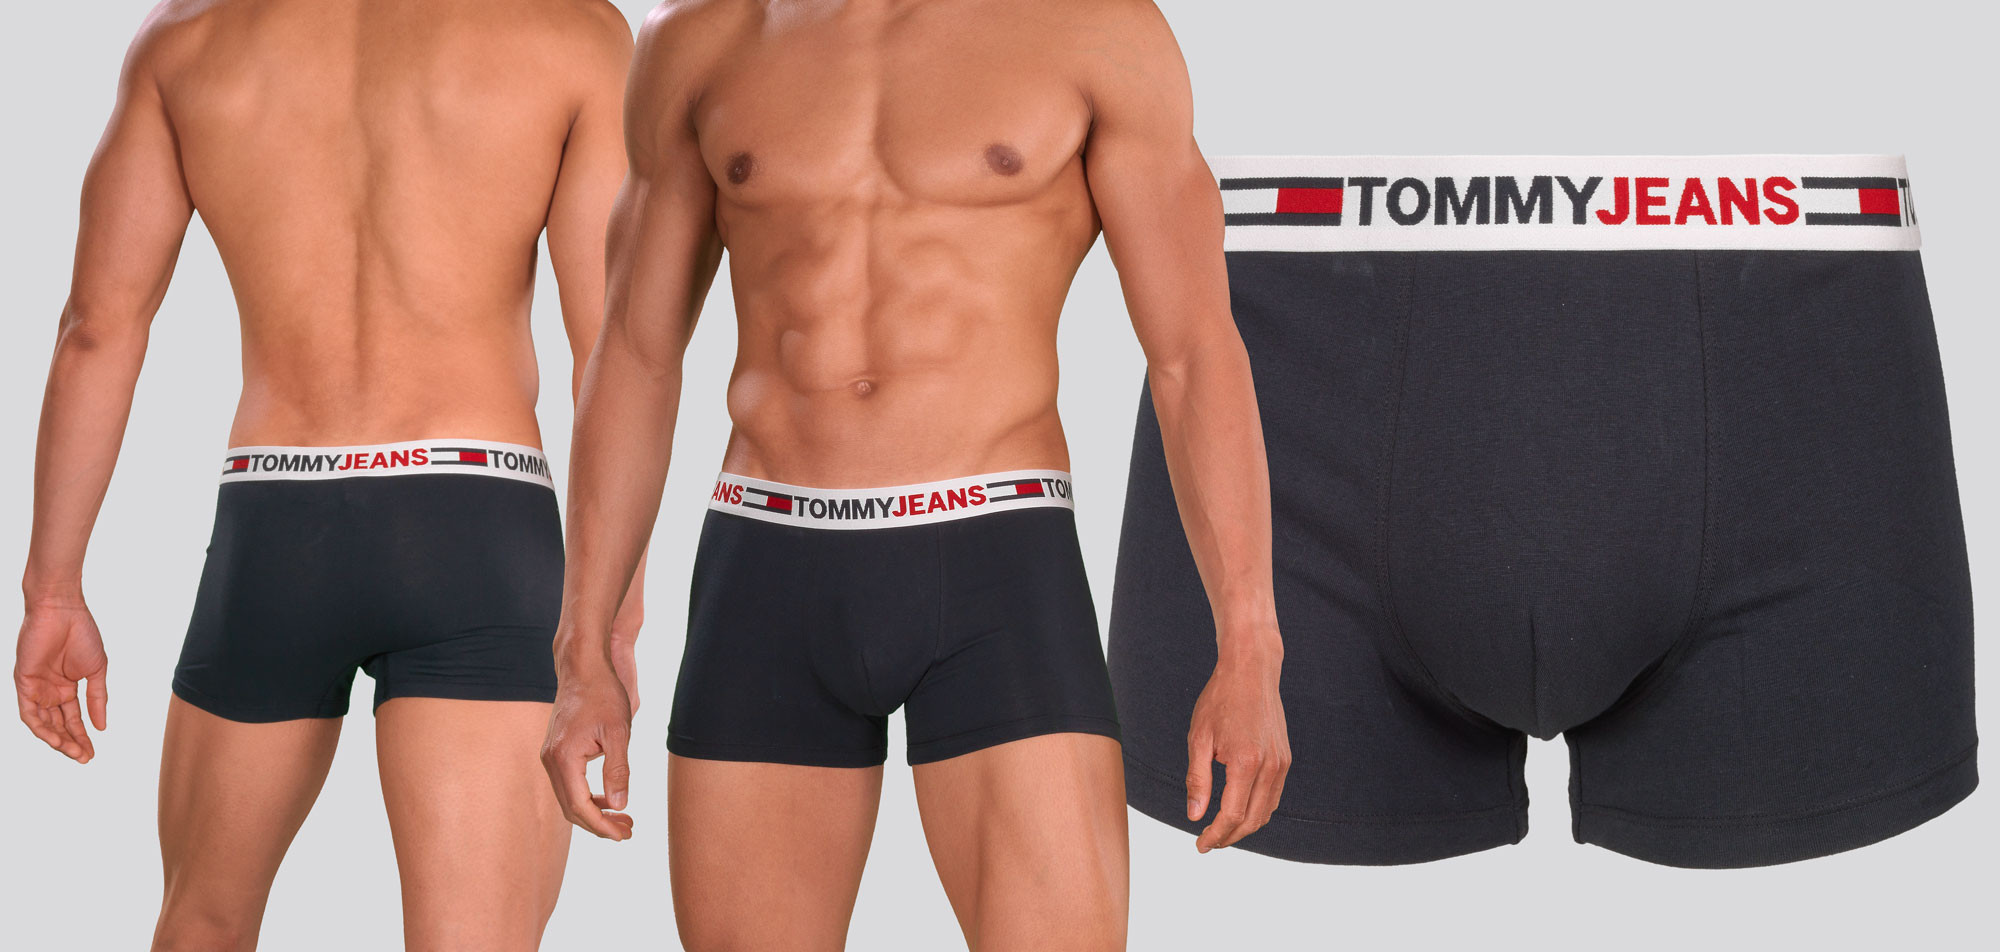 Tommy Hilfiger Recycled Cotton Trunk 401, color Nee